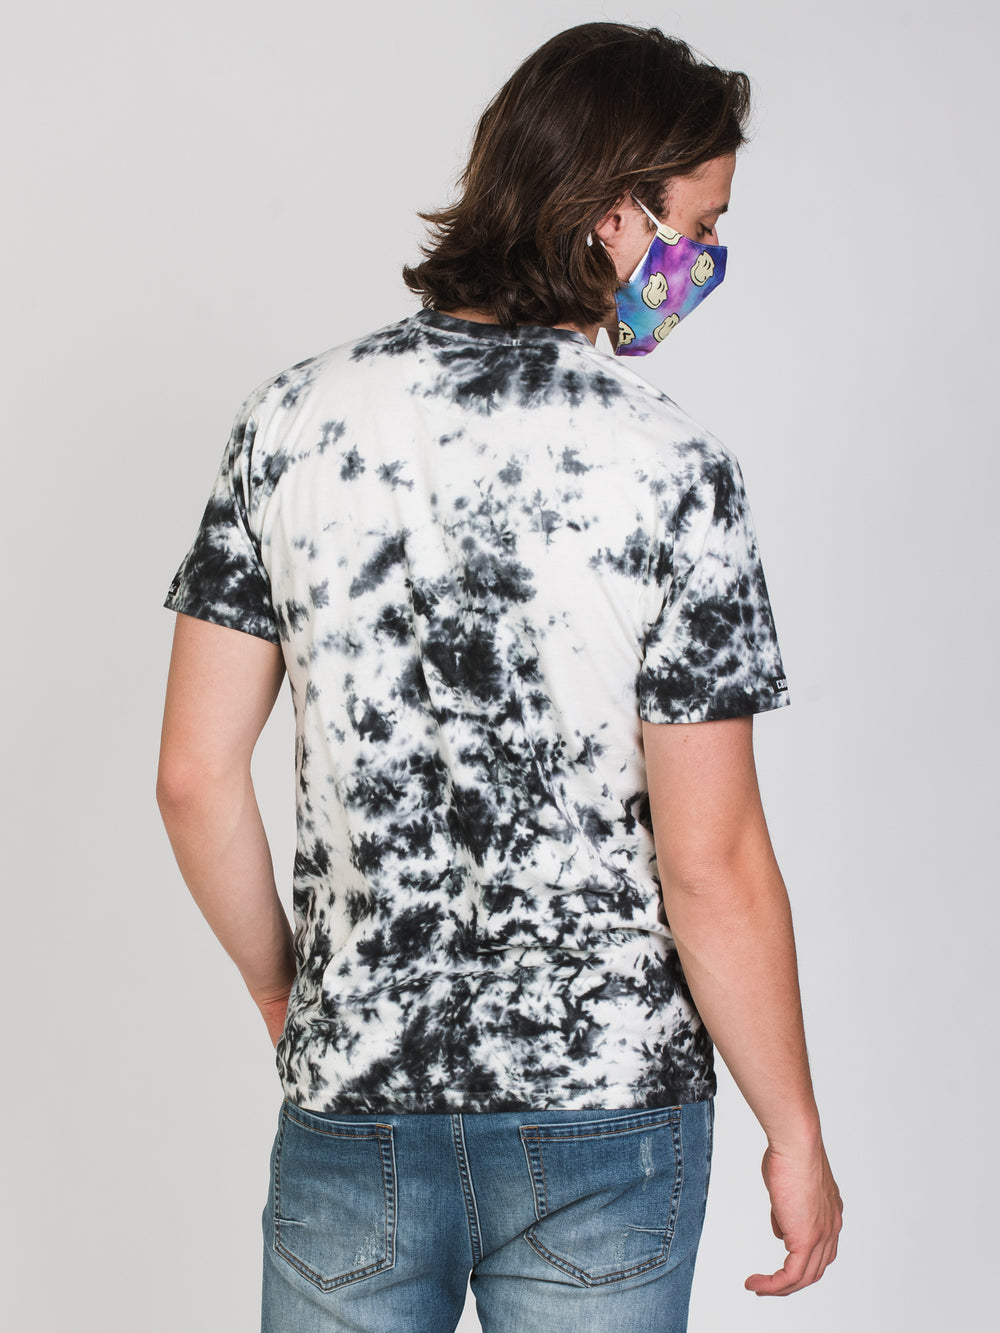 CROOKS & CASTLES C&C TIE DYE EMBROIDERED T-SHIRT - CLEARANCE